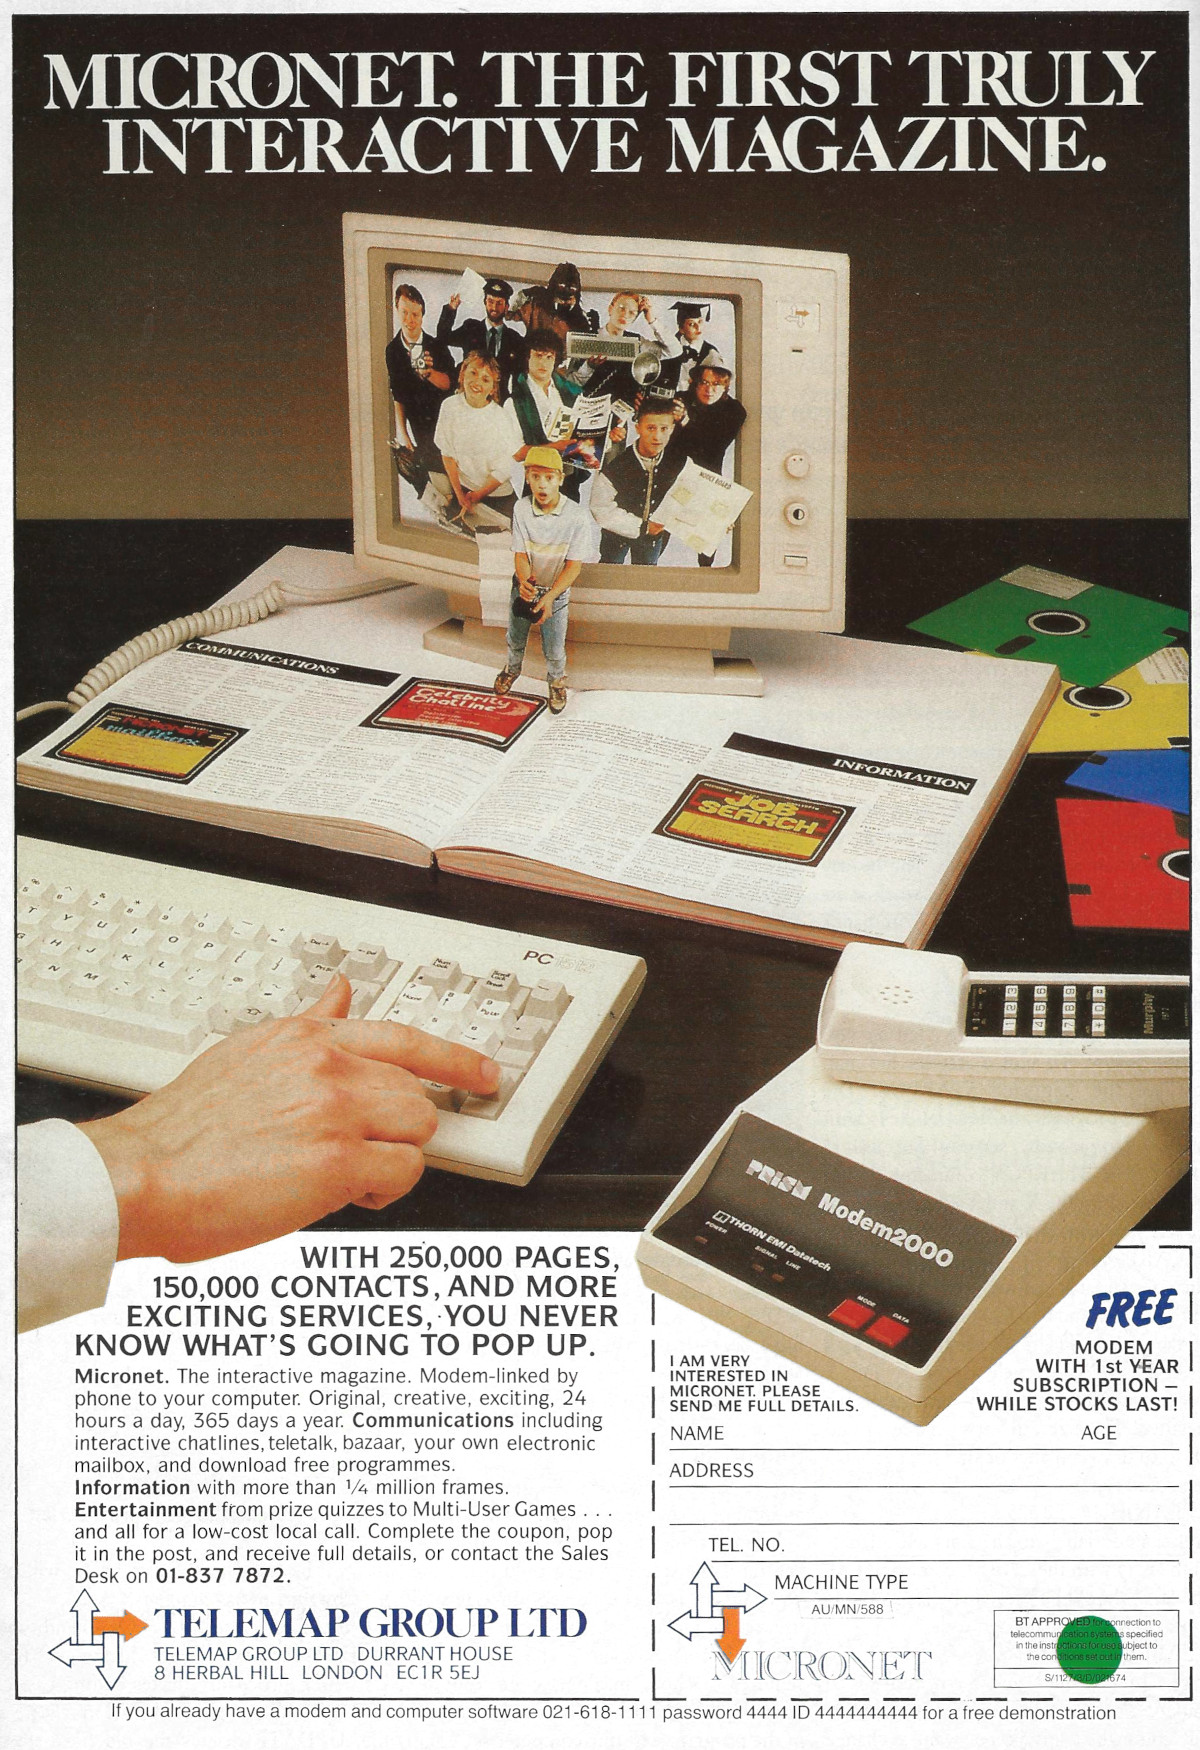 An advert for Micronet, selling it as an interactive magazine and featuring Prism's Modem 2000 - built by Thorn EMI Datatech - which was free with a subscription. The keyboard in the advert is that of Amstrad's PC1512. Curiously, Micronet seems to have dropped its own branding and become a product of Telemap Group only - possibly because Prism had gone bust a few years before this advert. From Acorn User, May 1988